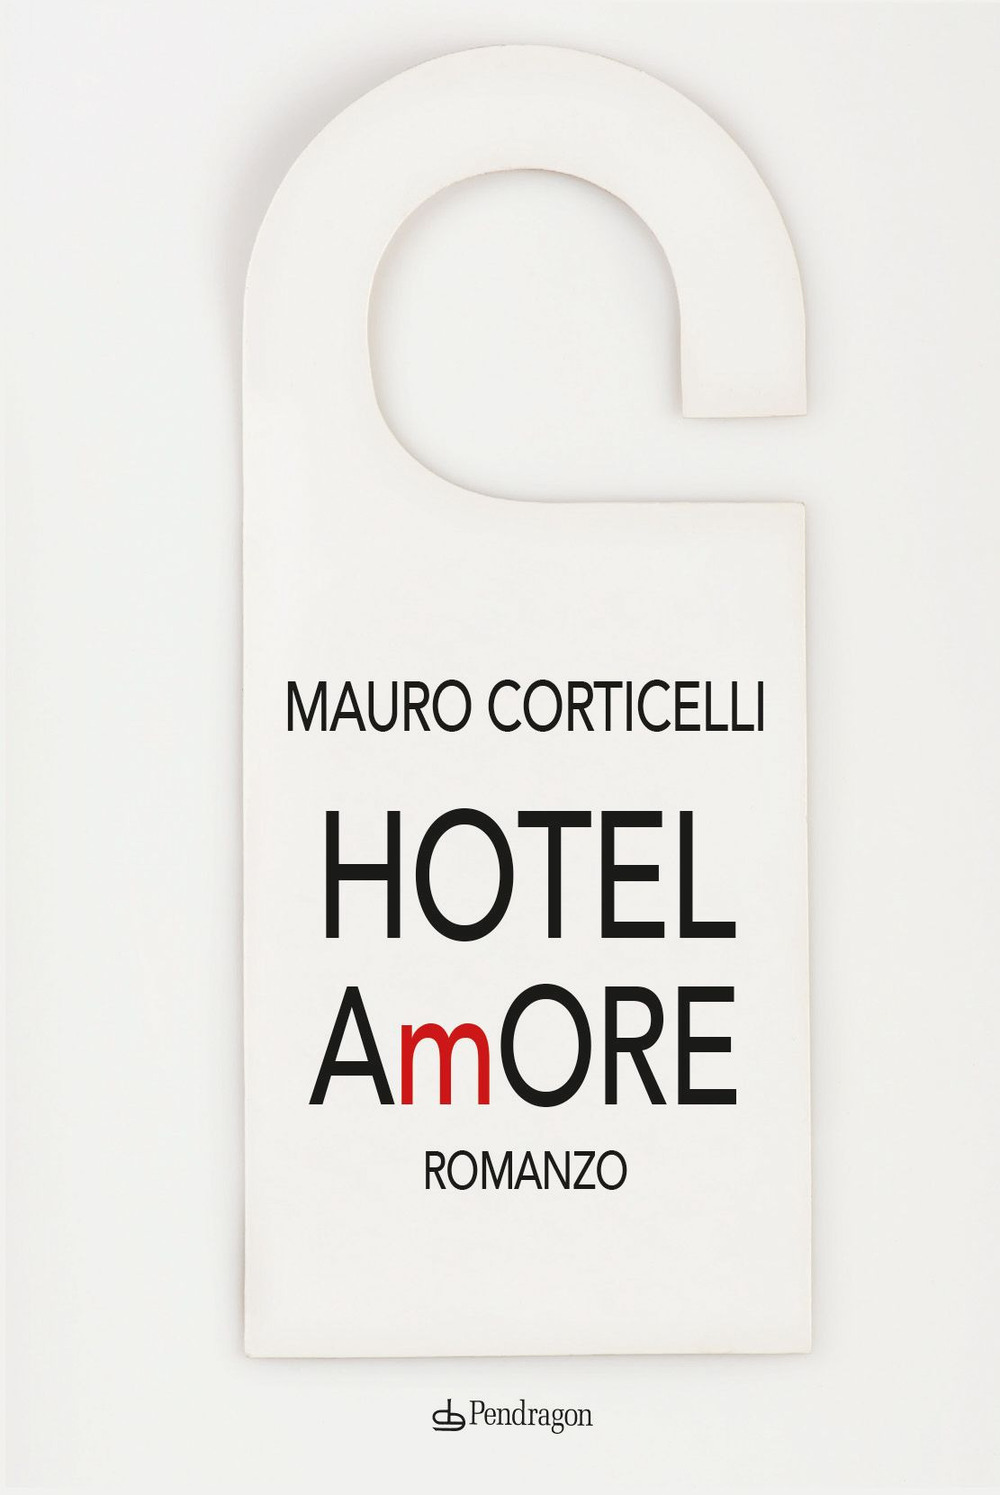 Hotel AmOre